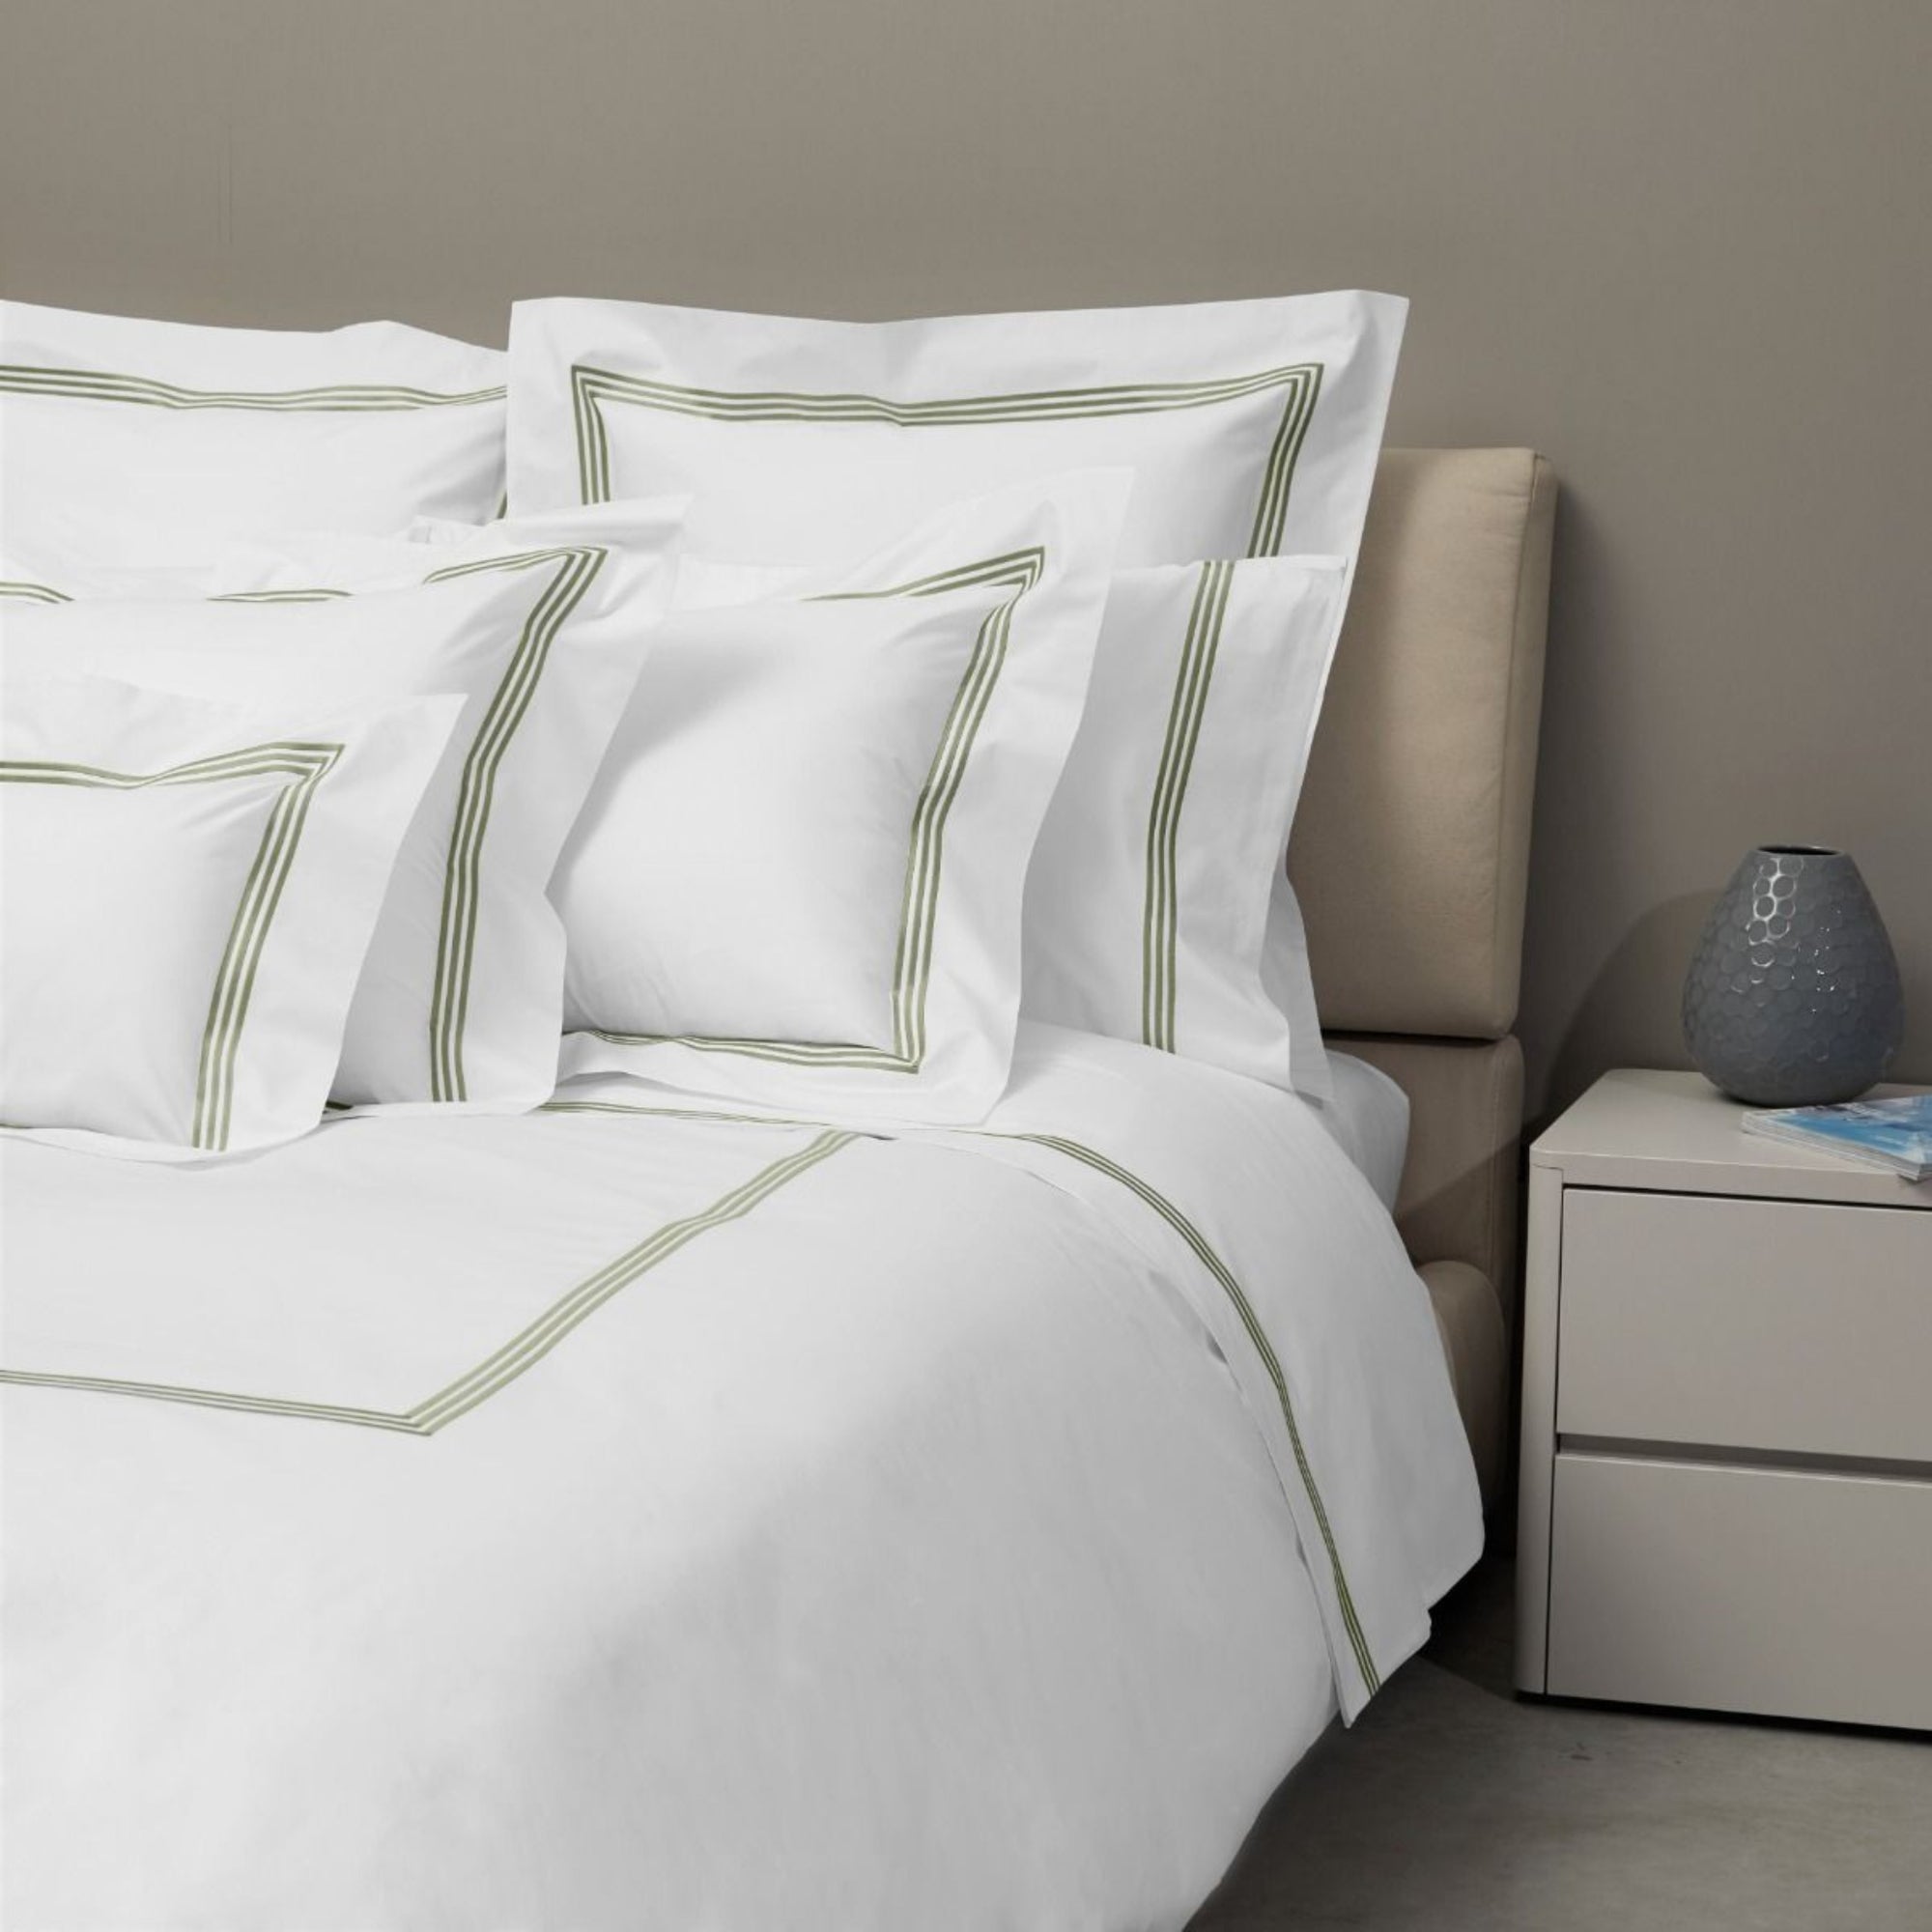 Bed Dressed in Signoria Platinum Percale Bedding in White/Olive Green Color